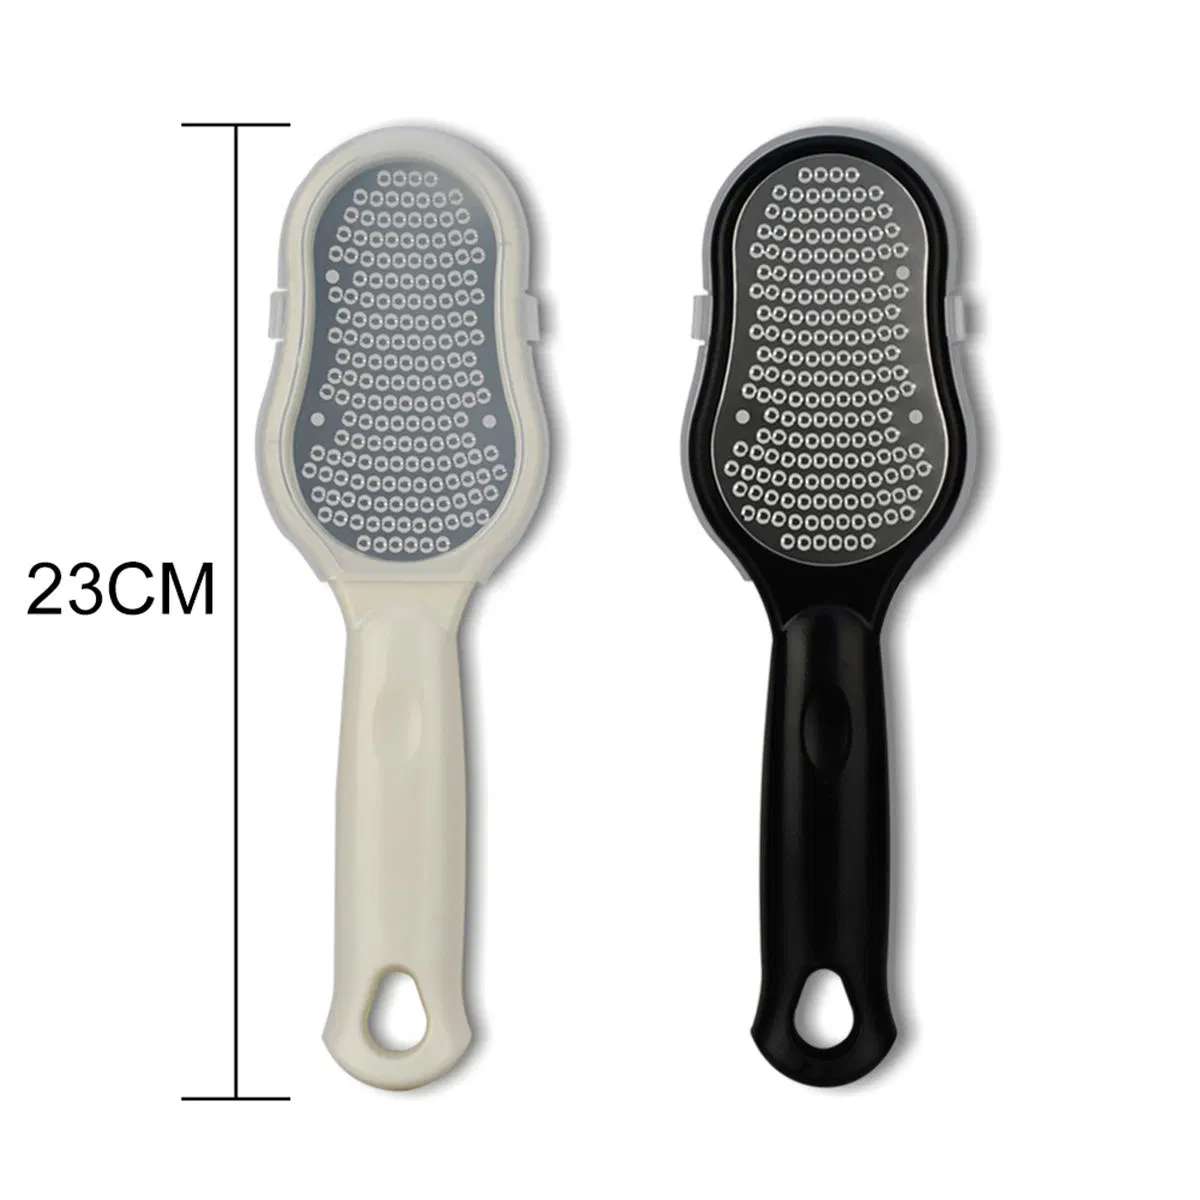 Hot Sale Stainless Steel Coarse Callus Remover Durable Pedicure Rasp Foot File